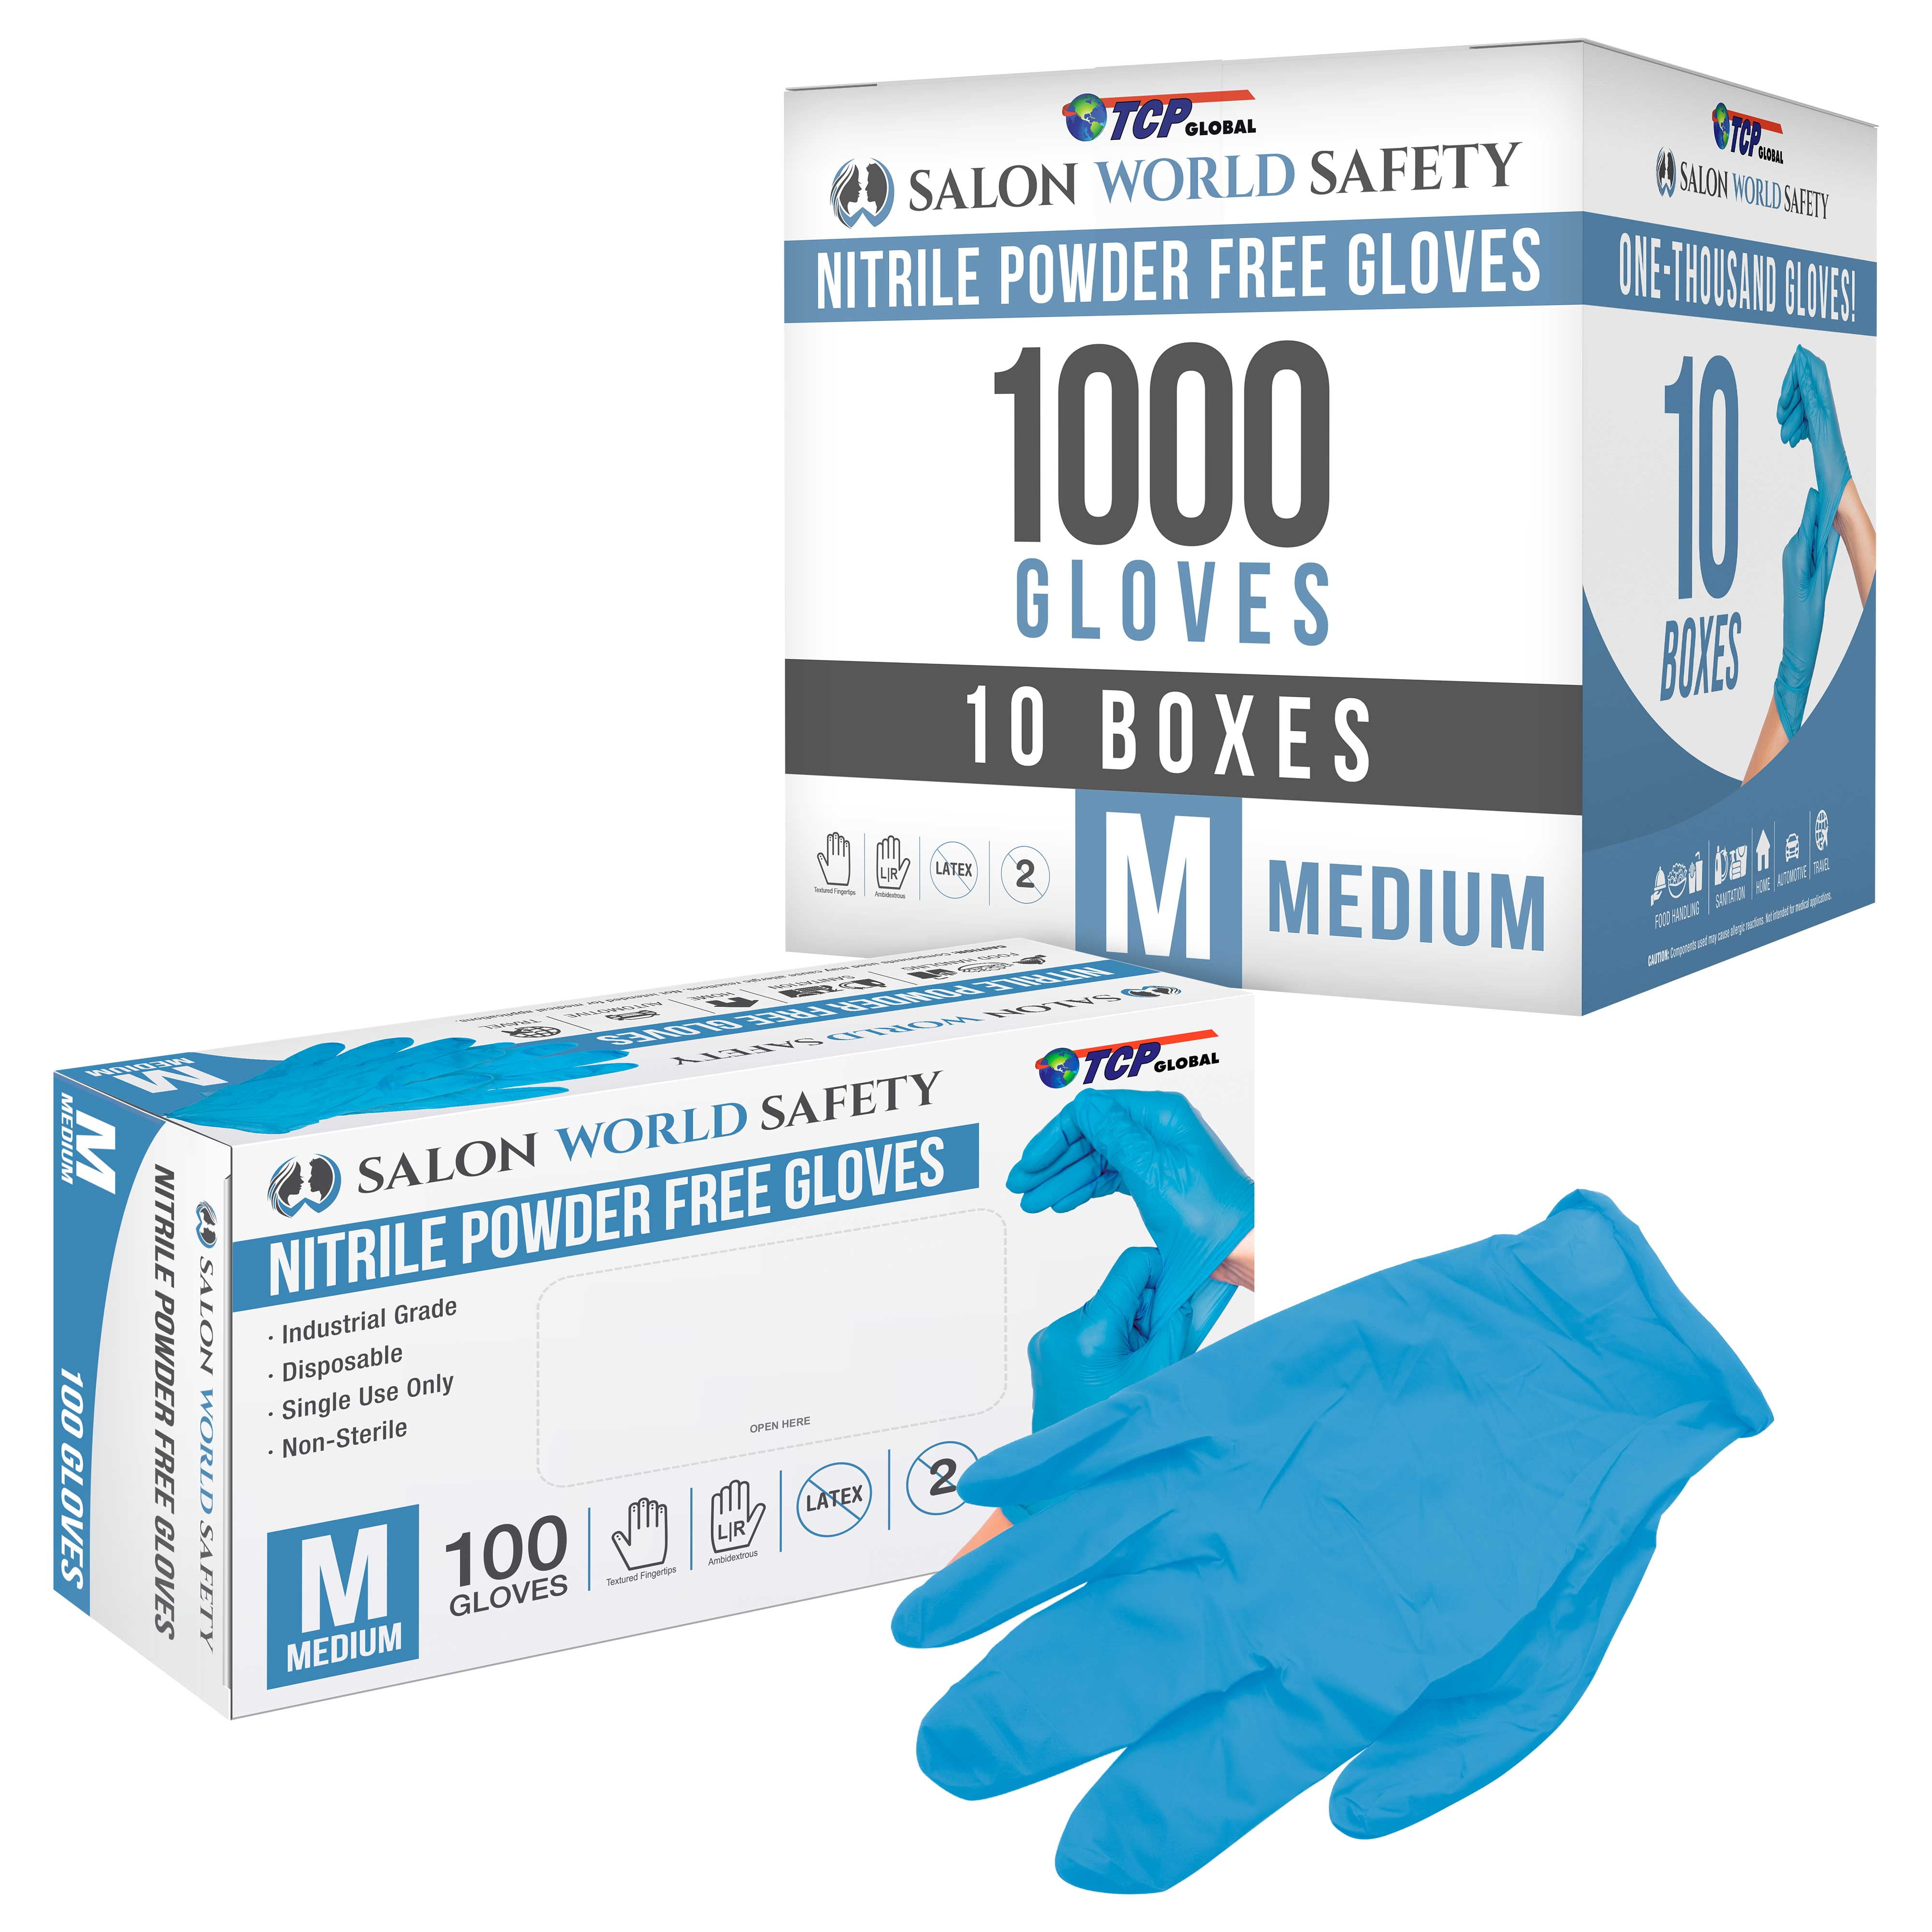 Textured Case of 100 4 mil Powder Free Blue Nitrile Gloves Latex Free Disposable Size Large